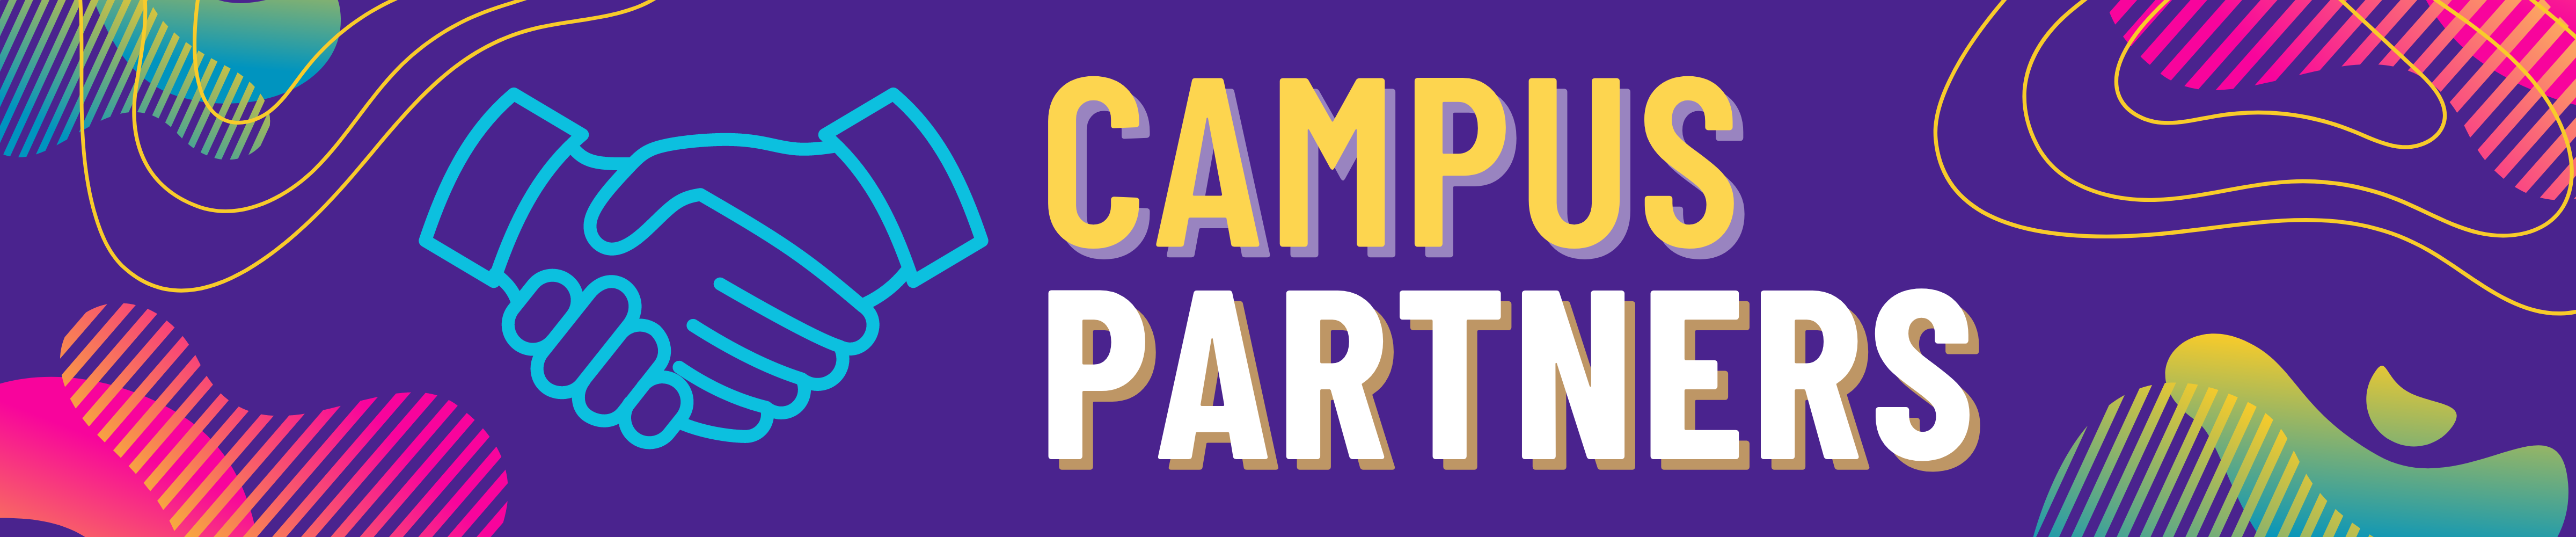 A digital banner with a dark purple background has bright blob shapes in the corners that fade from fuchsia to gold and turquoise to gold. The header reads, Campus Partners. On the right side are a pair of hands clasping each other in a handshake..